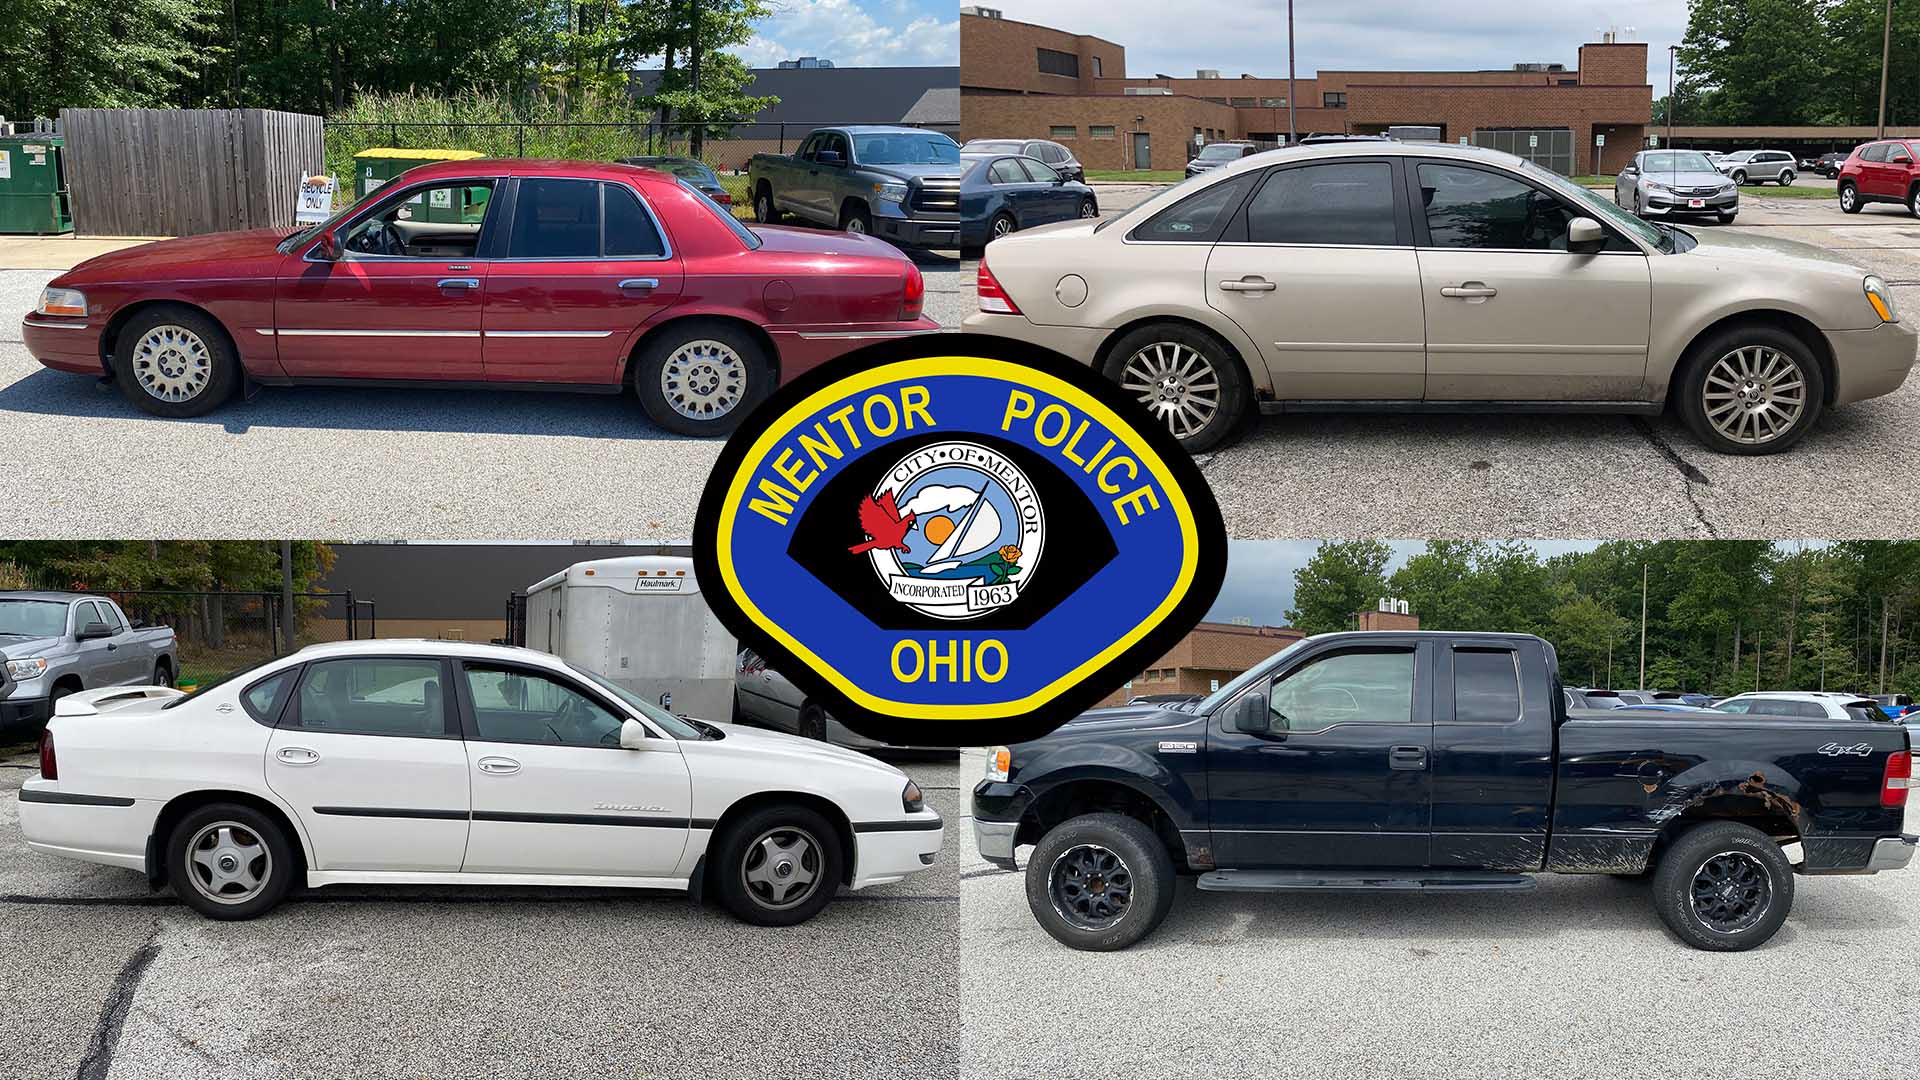 LEGAL NOTICE: Police Seized Vehicles for Sale - City of Mentor, Ohio